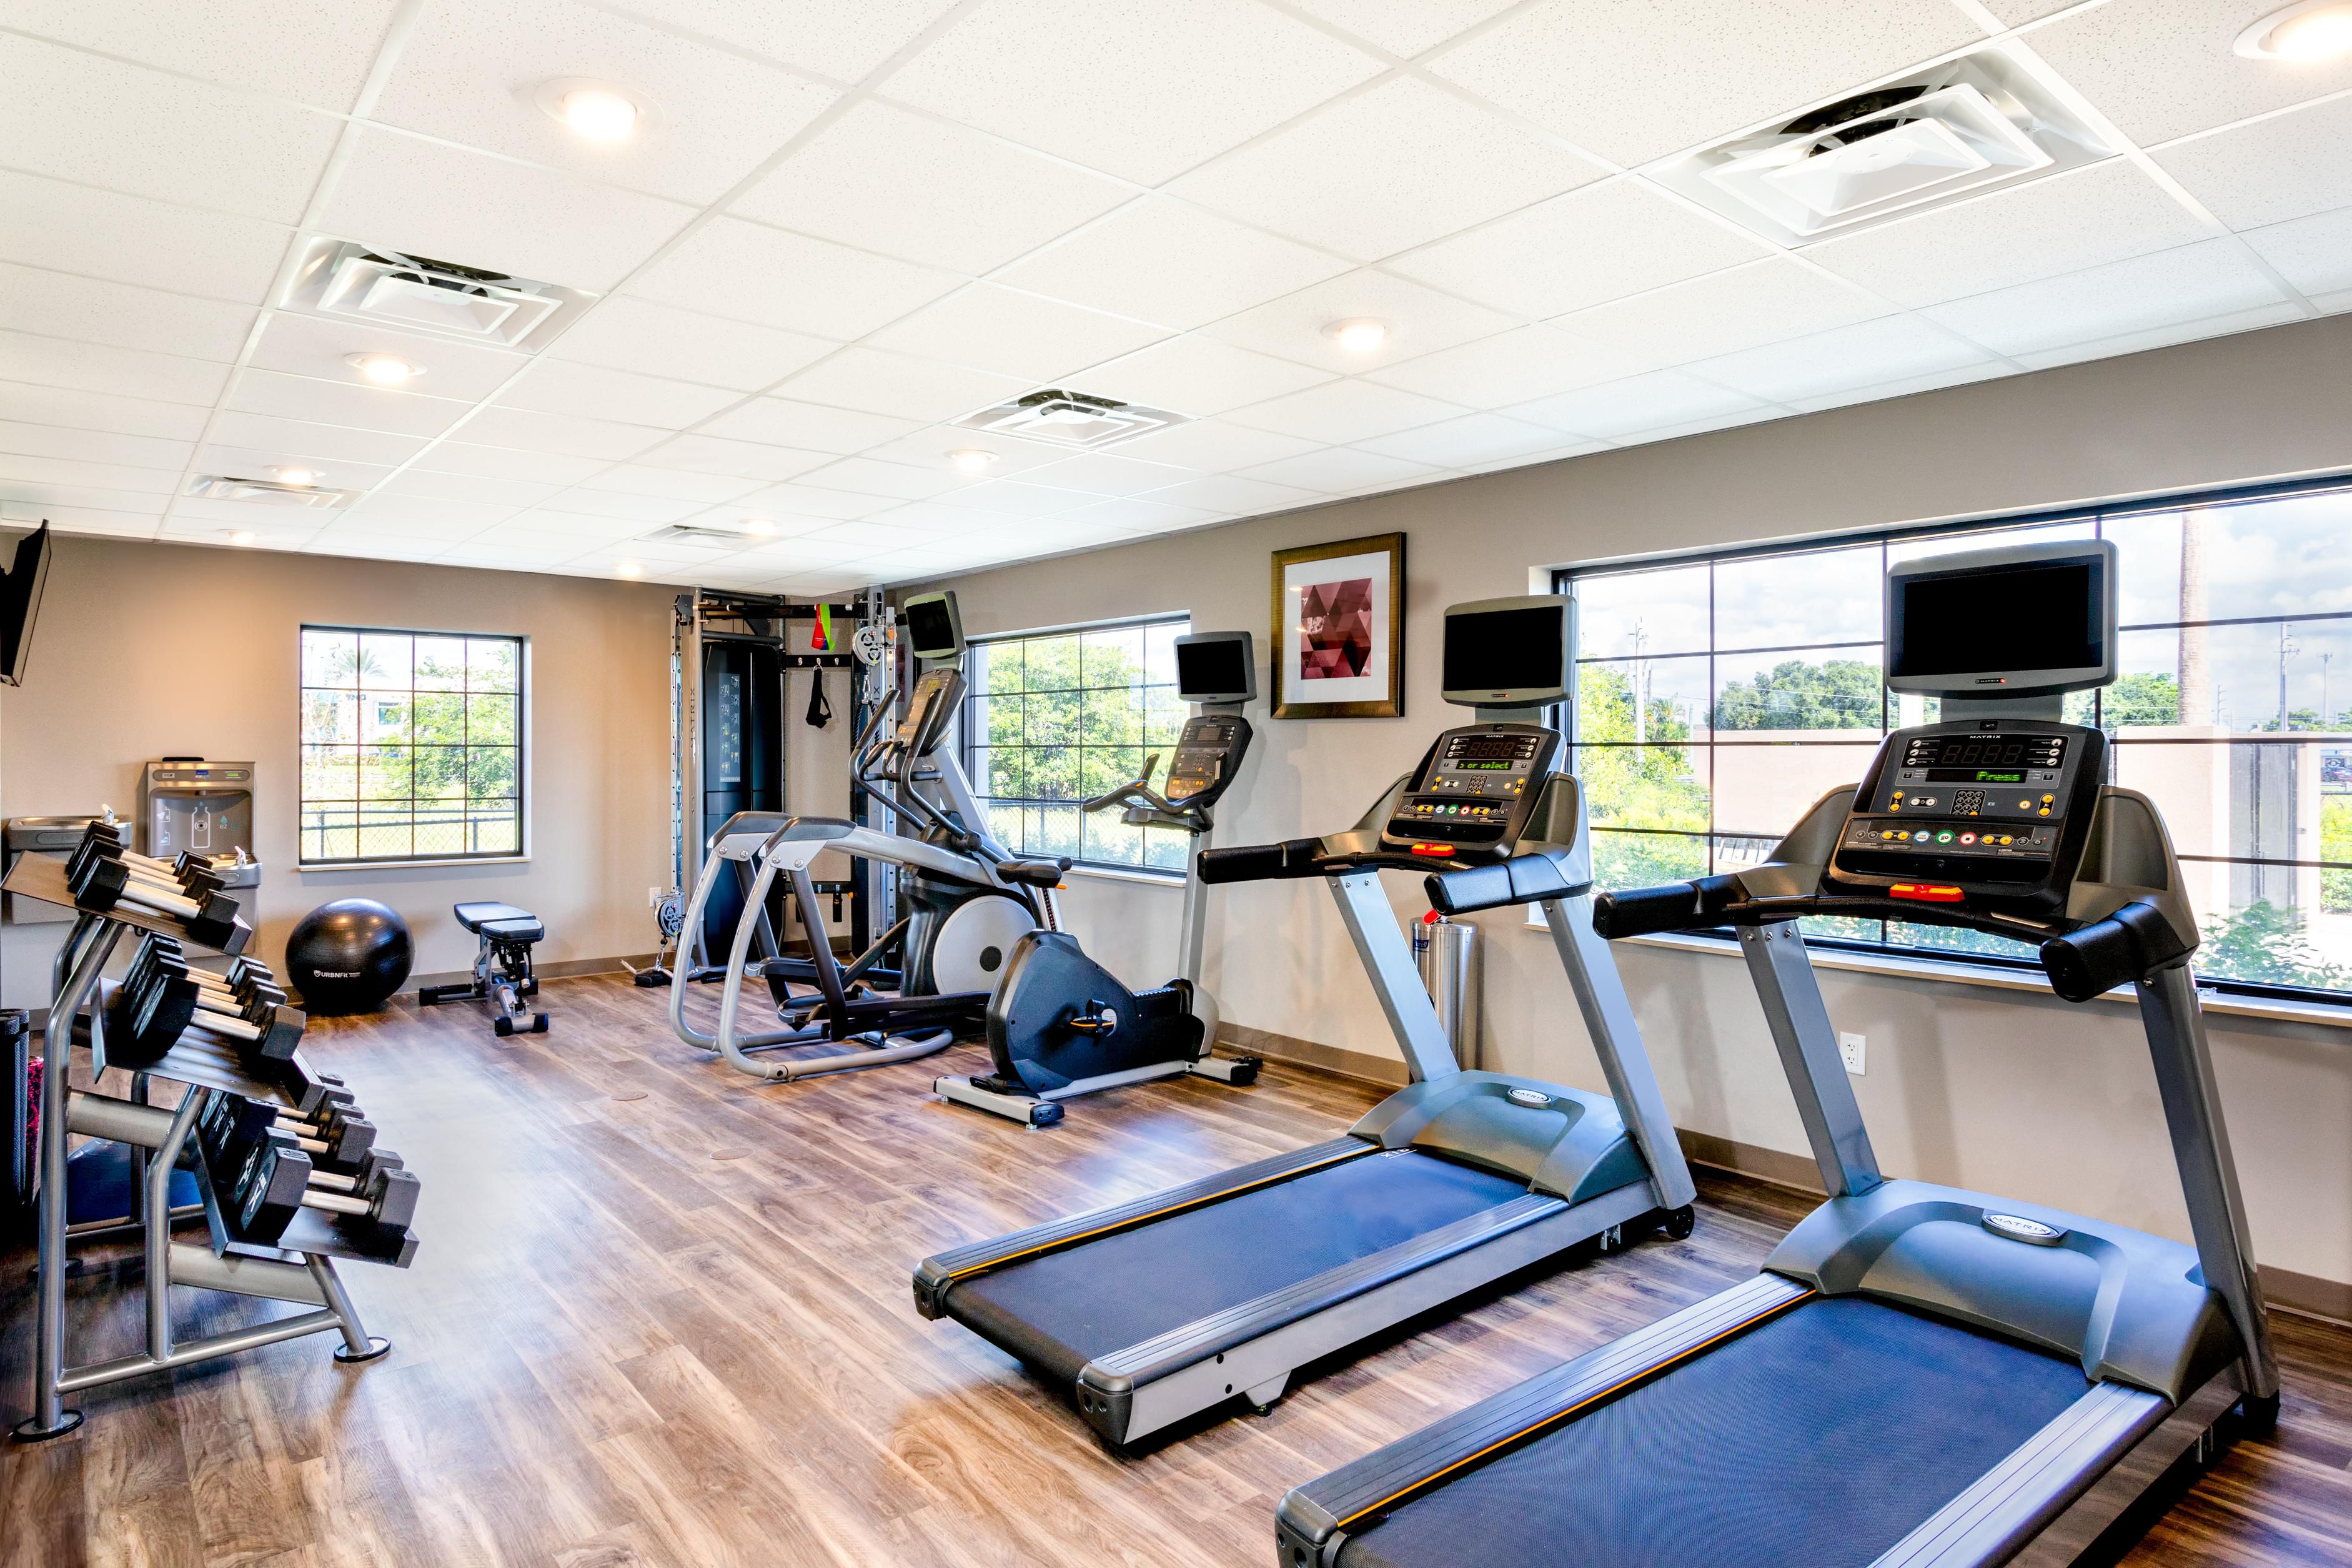 Our complimentary, state-of-the-art fitness center makes it easy for you to work out, have fun and stay fit.